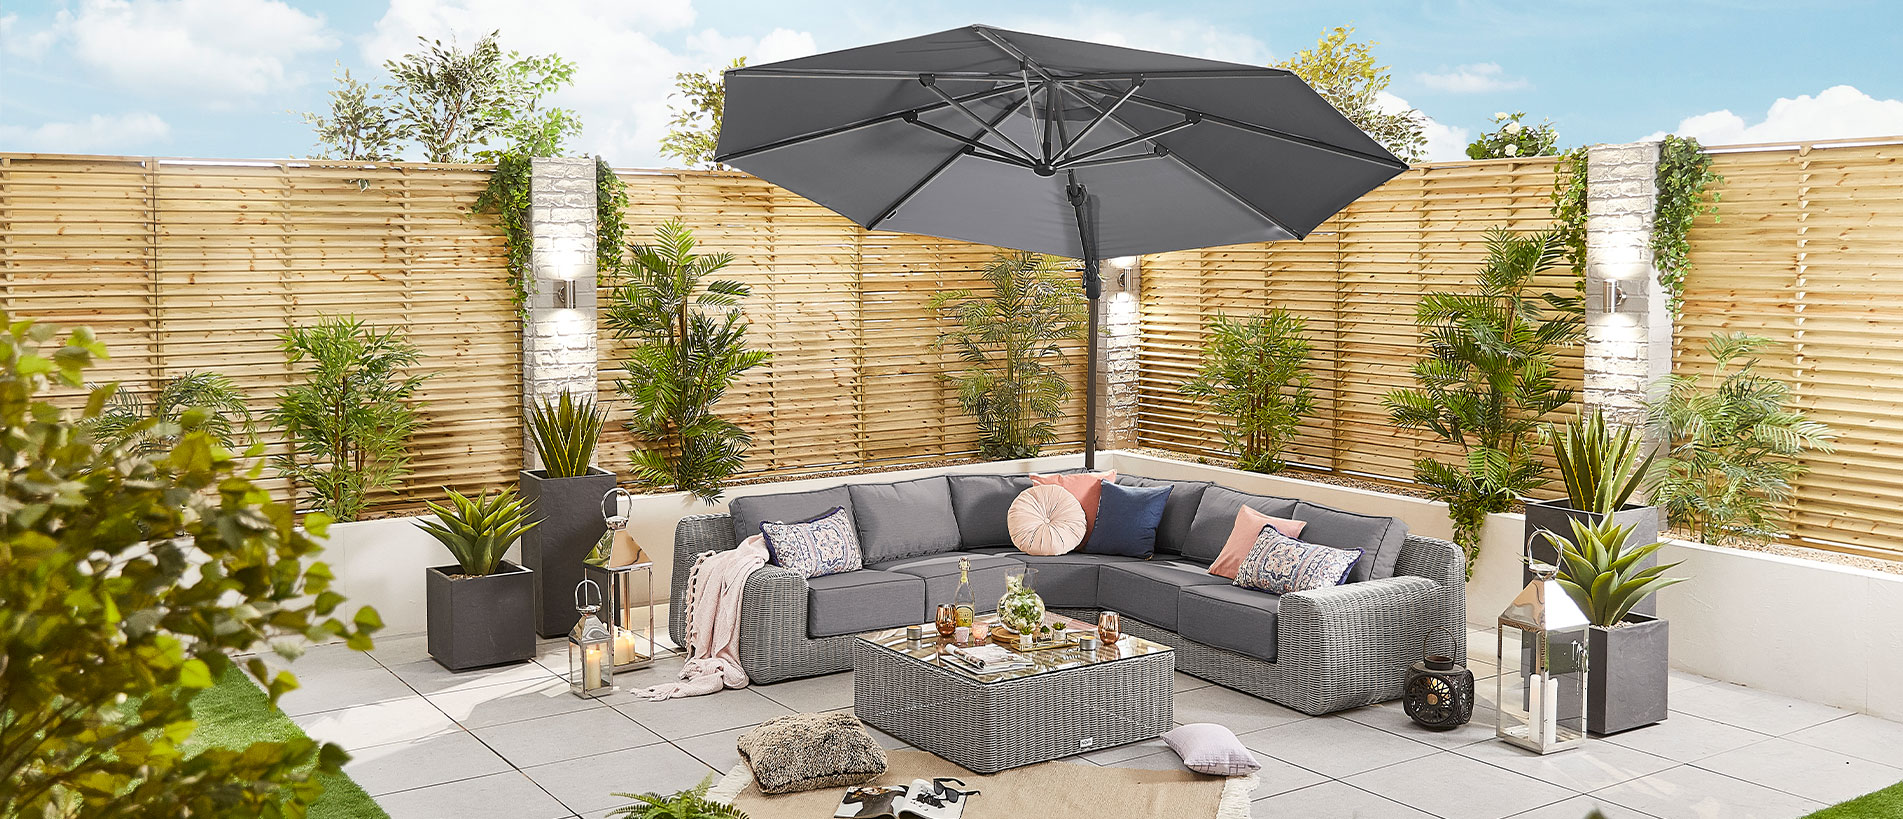 Importance of Parasols in Outdoor Living: Enhancing Your Garden Area